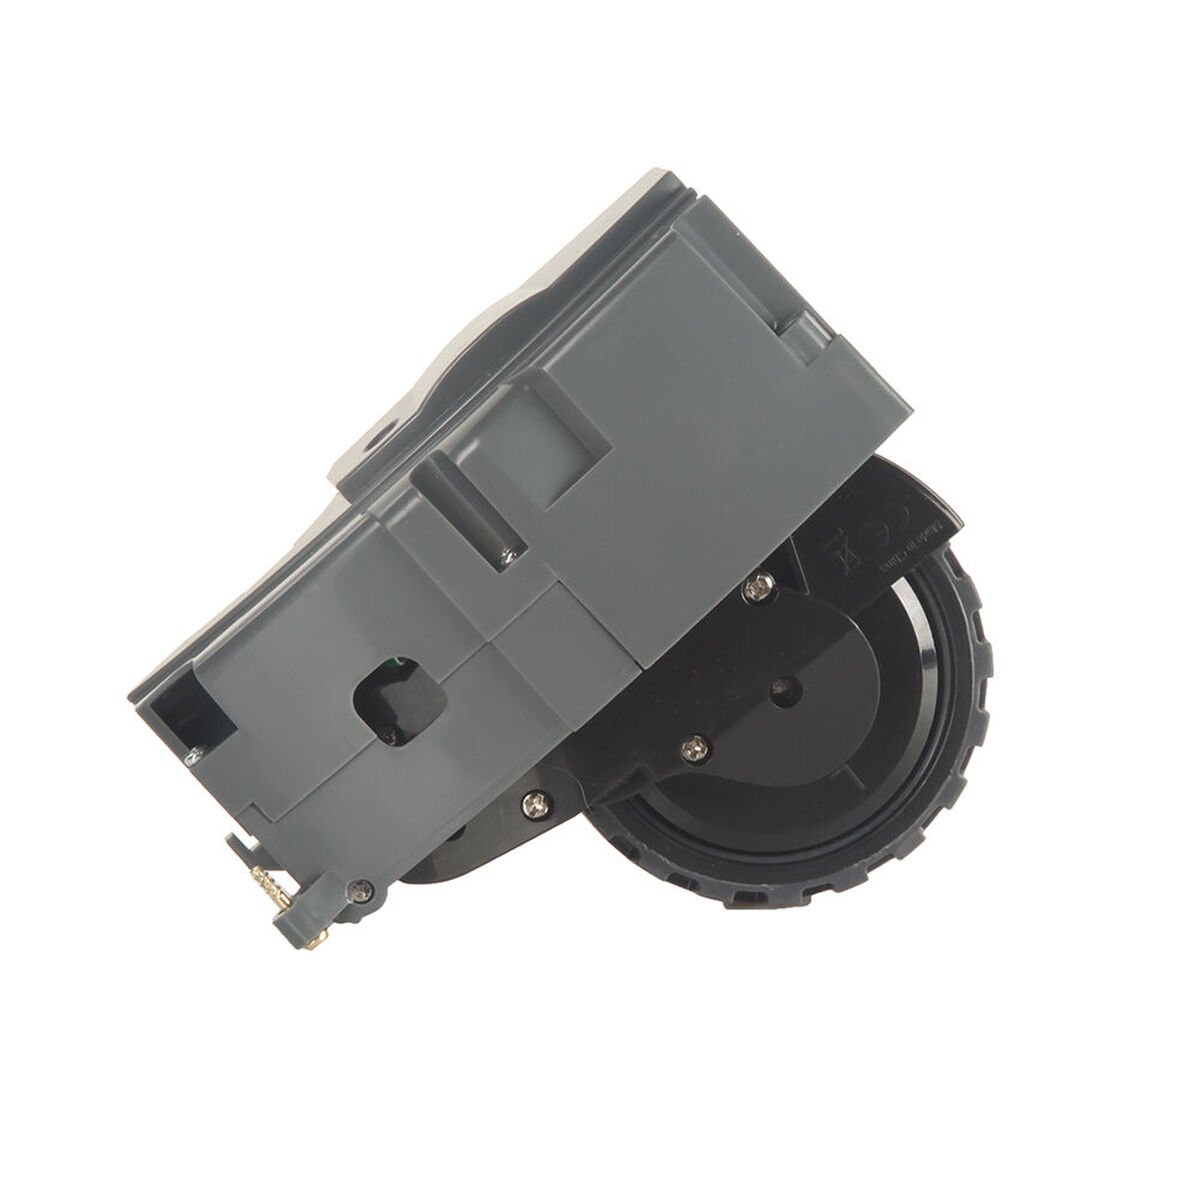 Left Wheel Module For Roomba 800 Series, , large image number 0